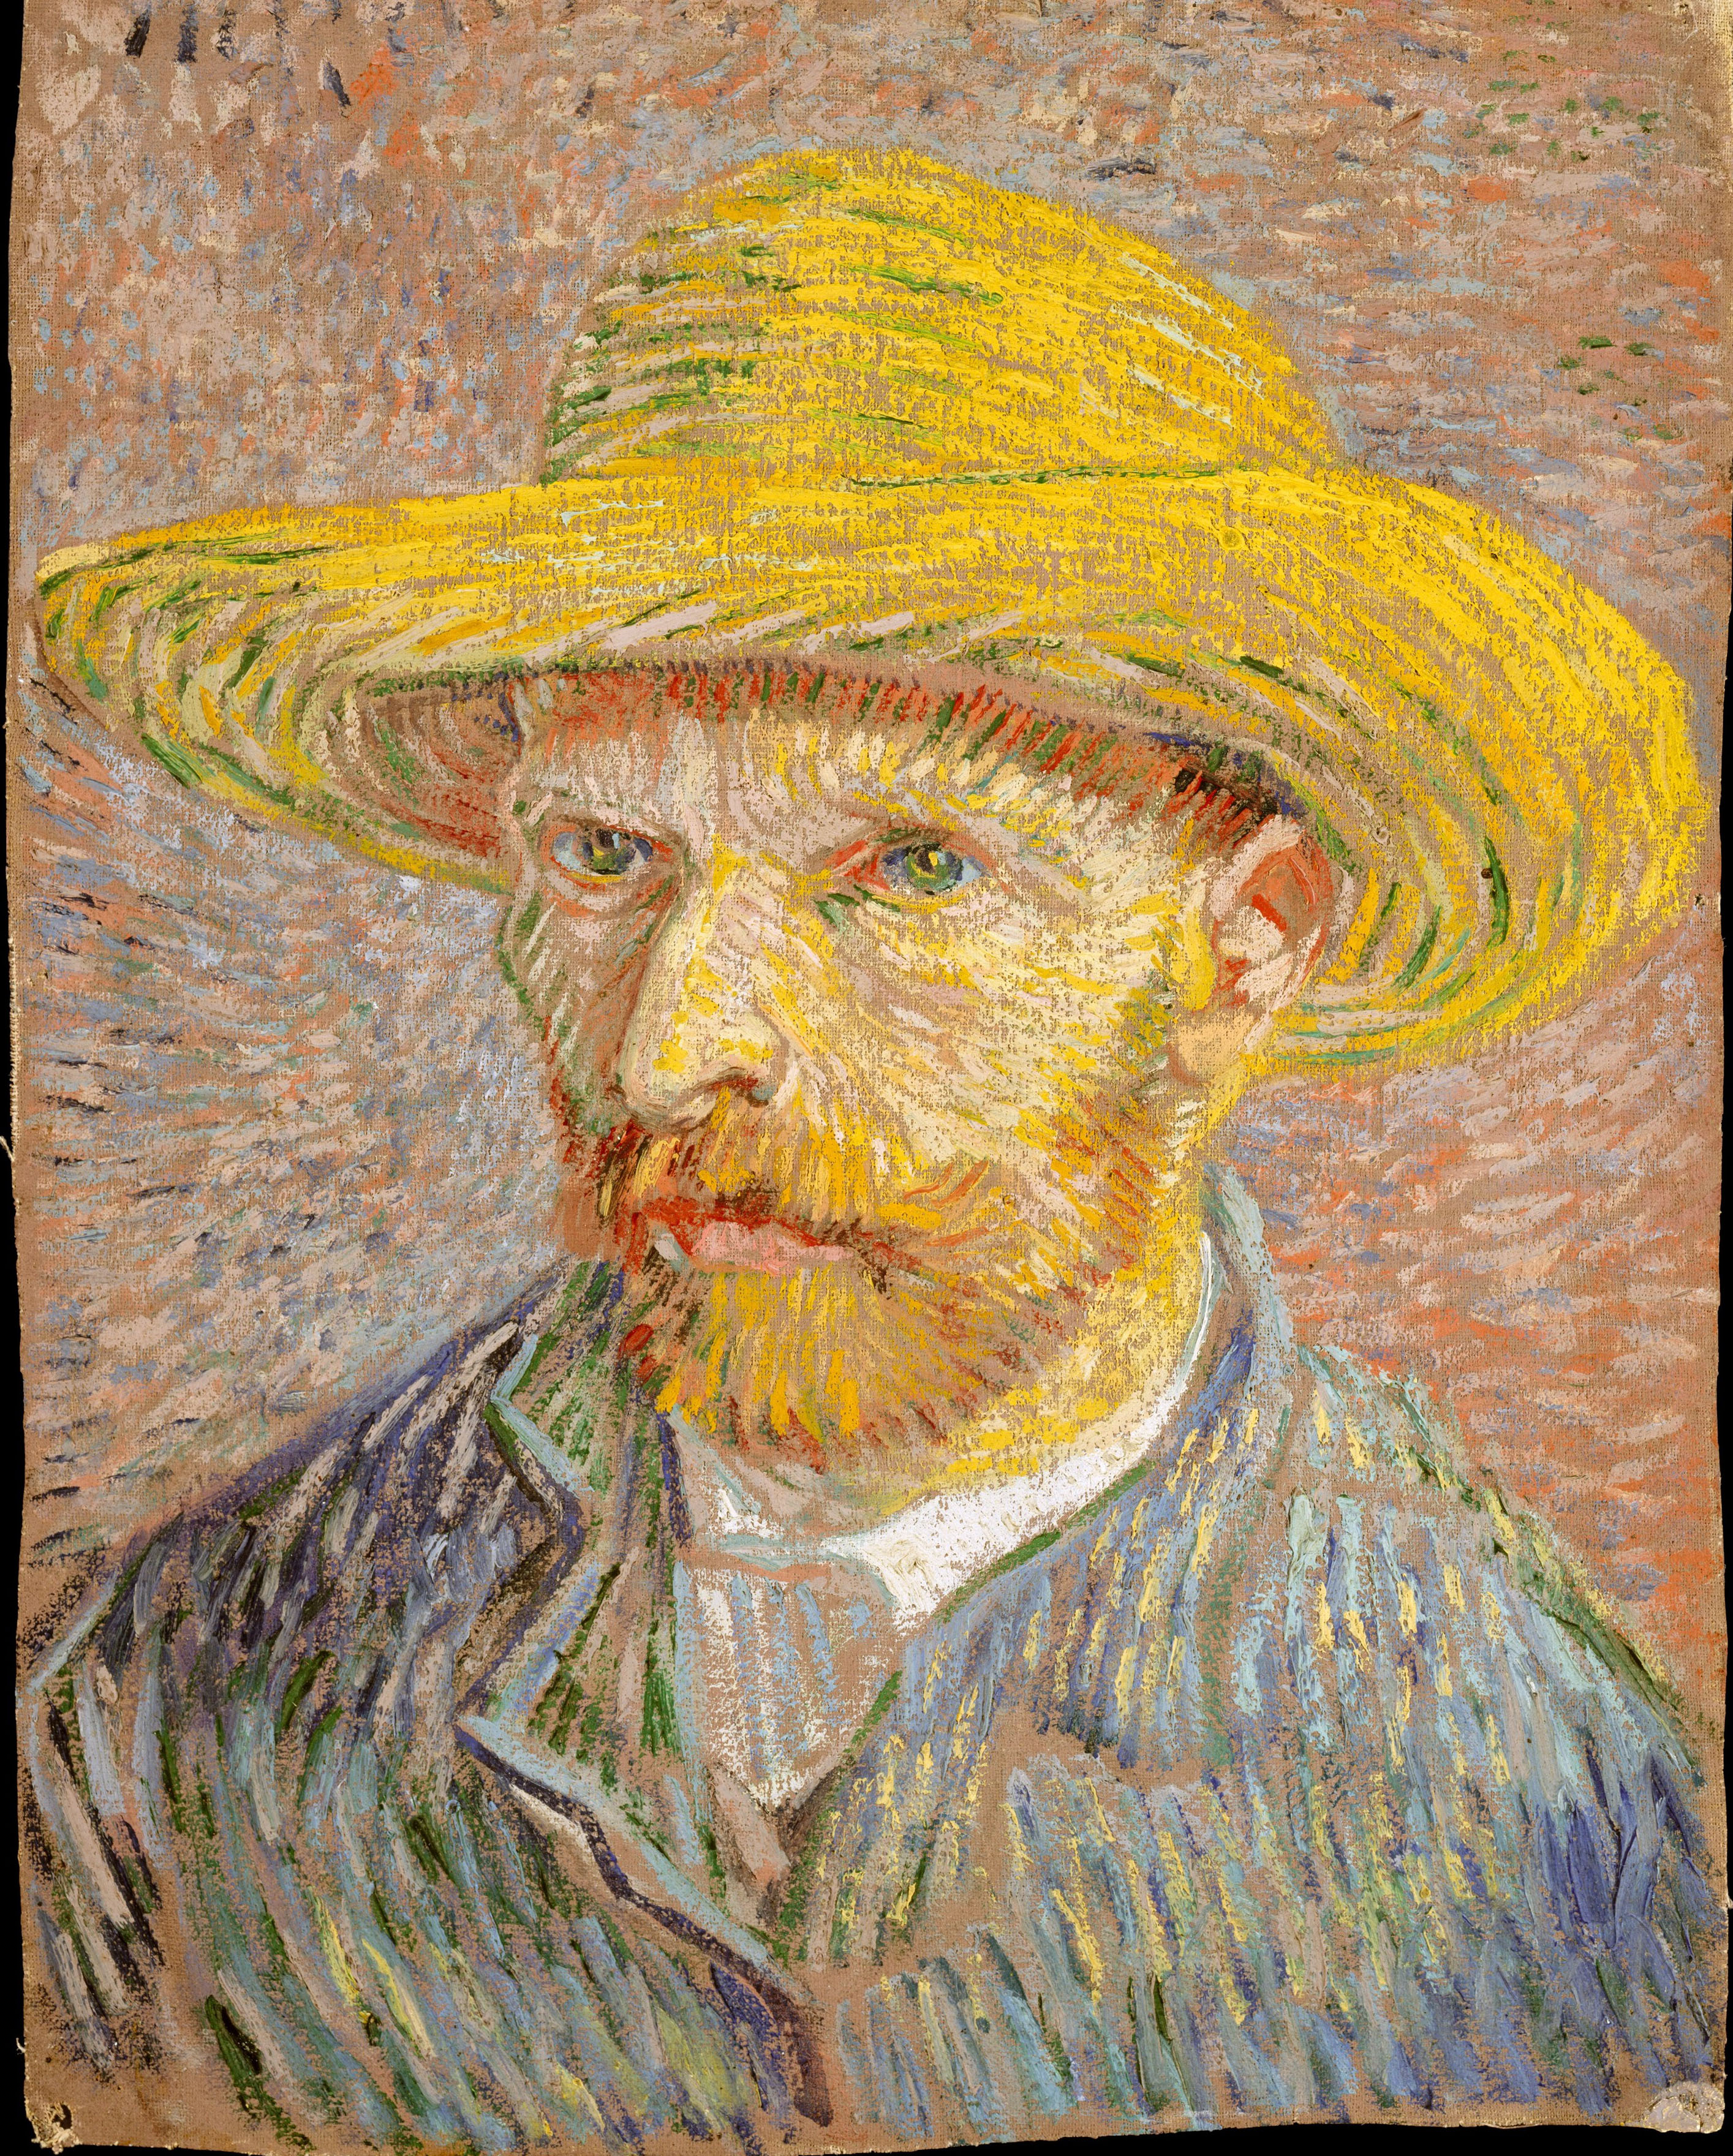 Vincent van Gogh, Self-Portrait with a Straw Hat (obverse: The Potato Peeler), 1887, The Metropolitan Museum of Art, New York, NY, USA.